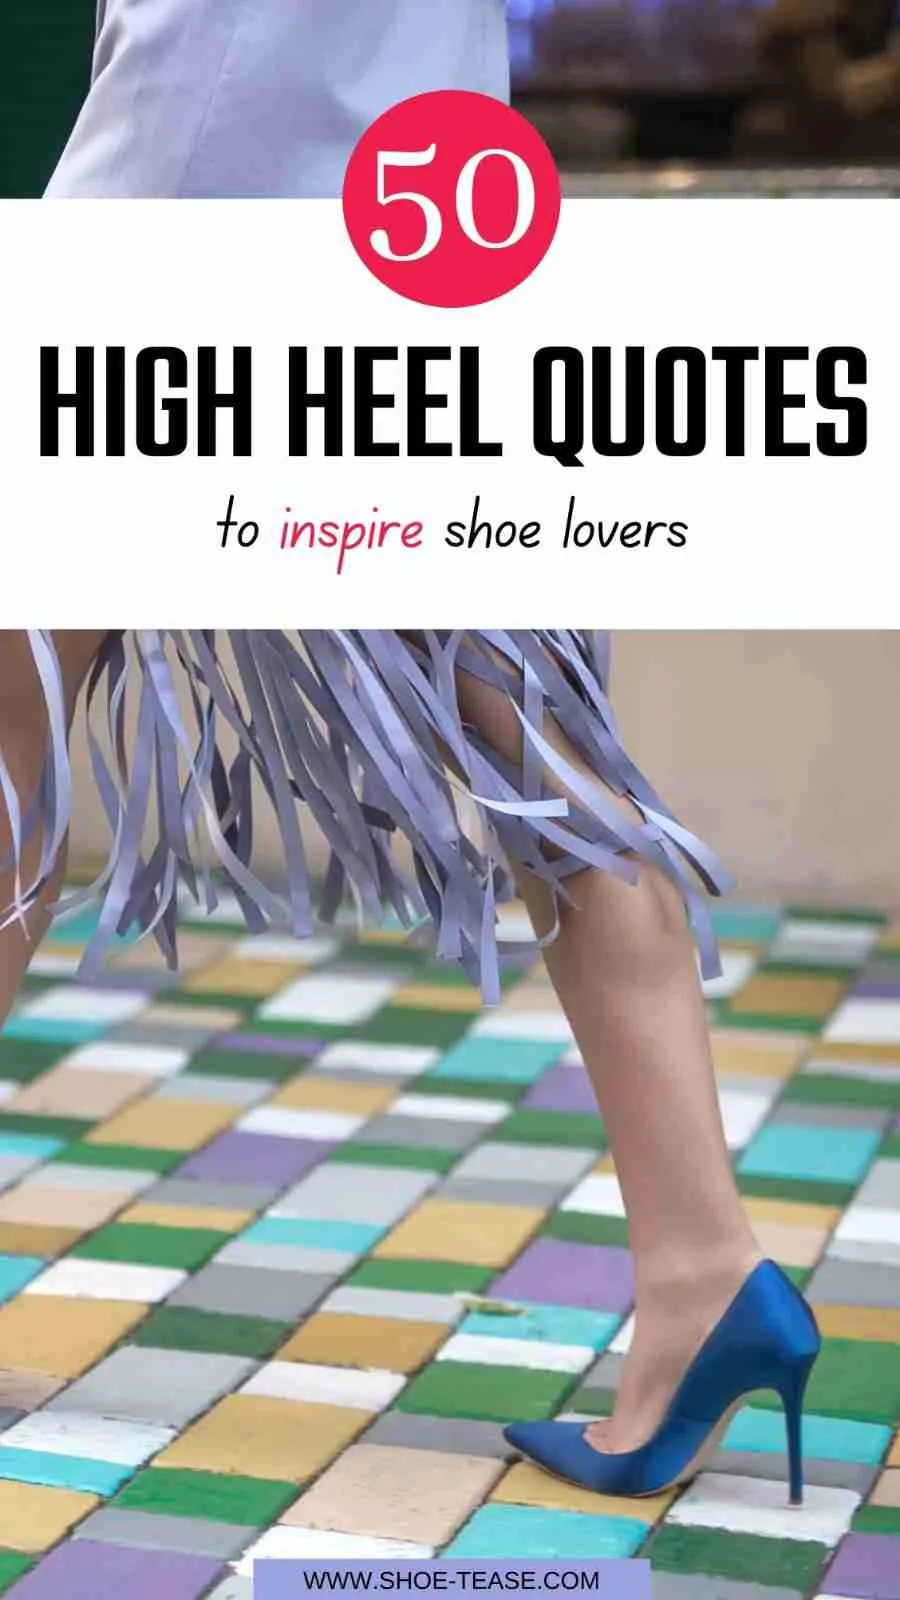 The Ultimate List Of Quotes For The Shoe Lover In All Of Us – Life Traveled  In Stilettos | Shoe lover, Shoes quotes, Stiletto